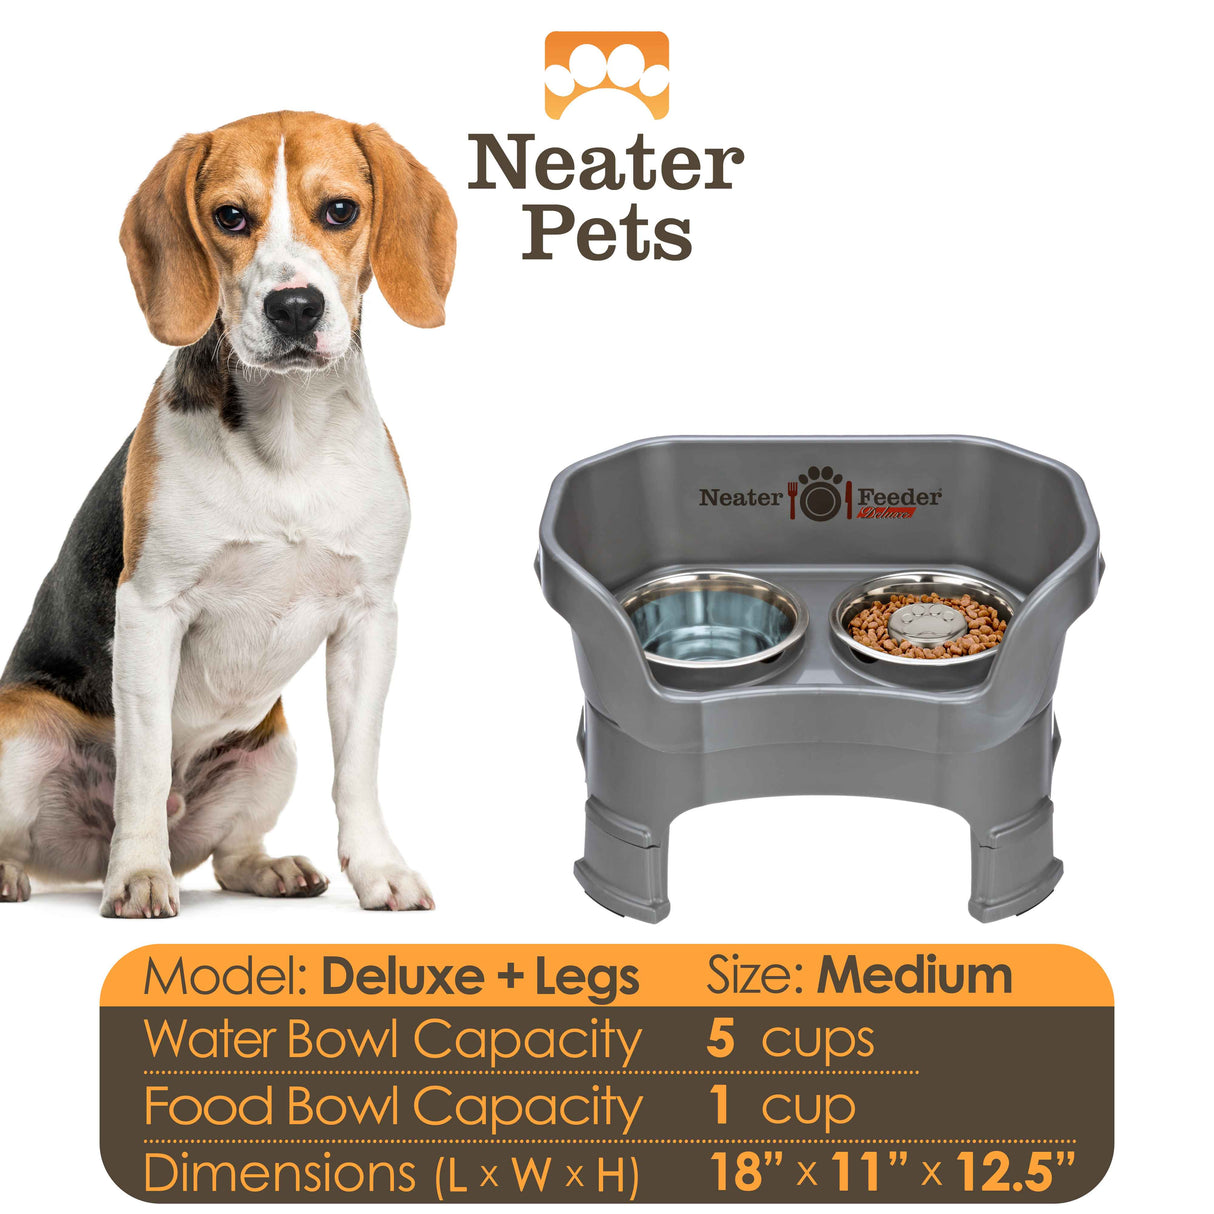 gunmetal gray medium DELUXE Neater Feeder with Stainless Steel Slow Feed Bowl with leg extensions information chart